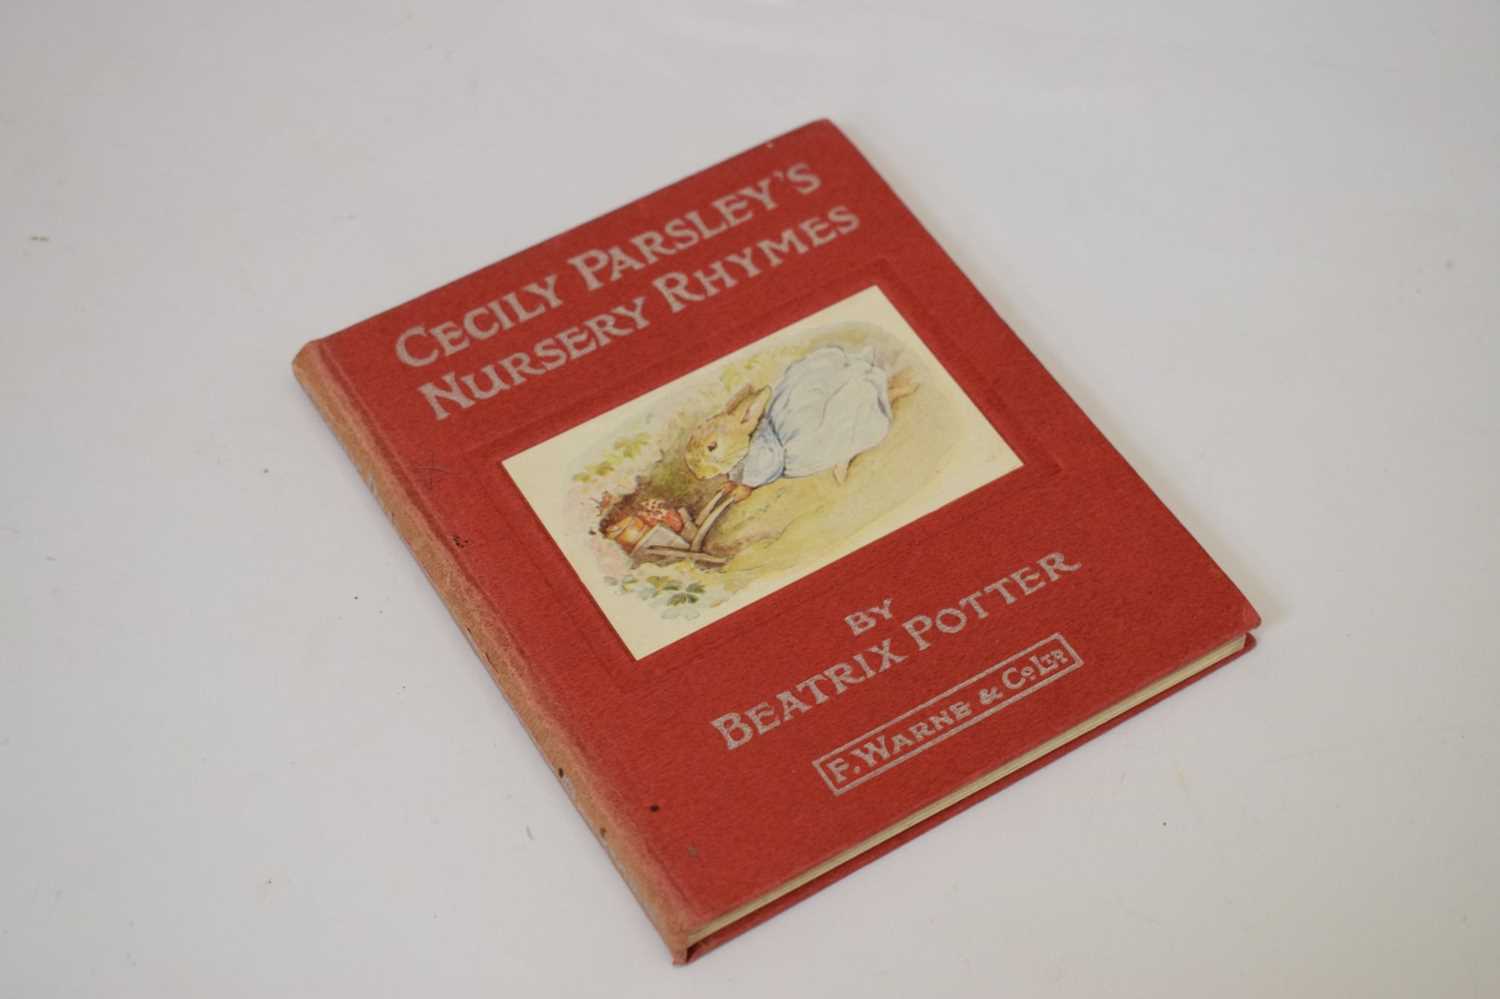 Potter, Beatrix - 'Cecily Parsley's Nursery Rhymes' - First edition - Image 2 of 23